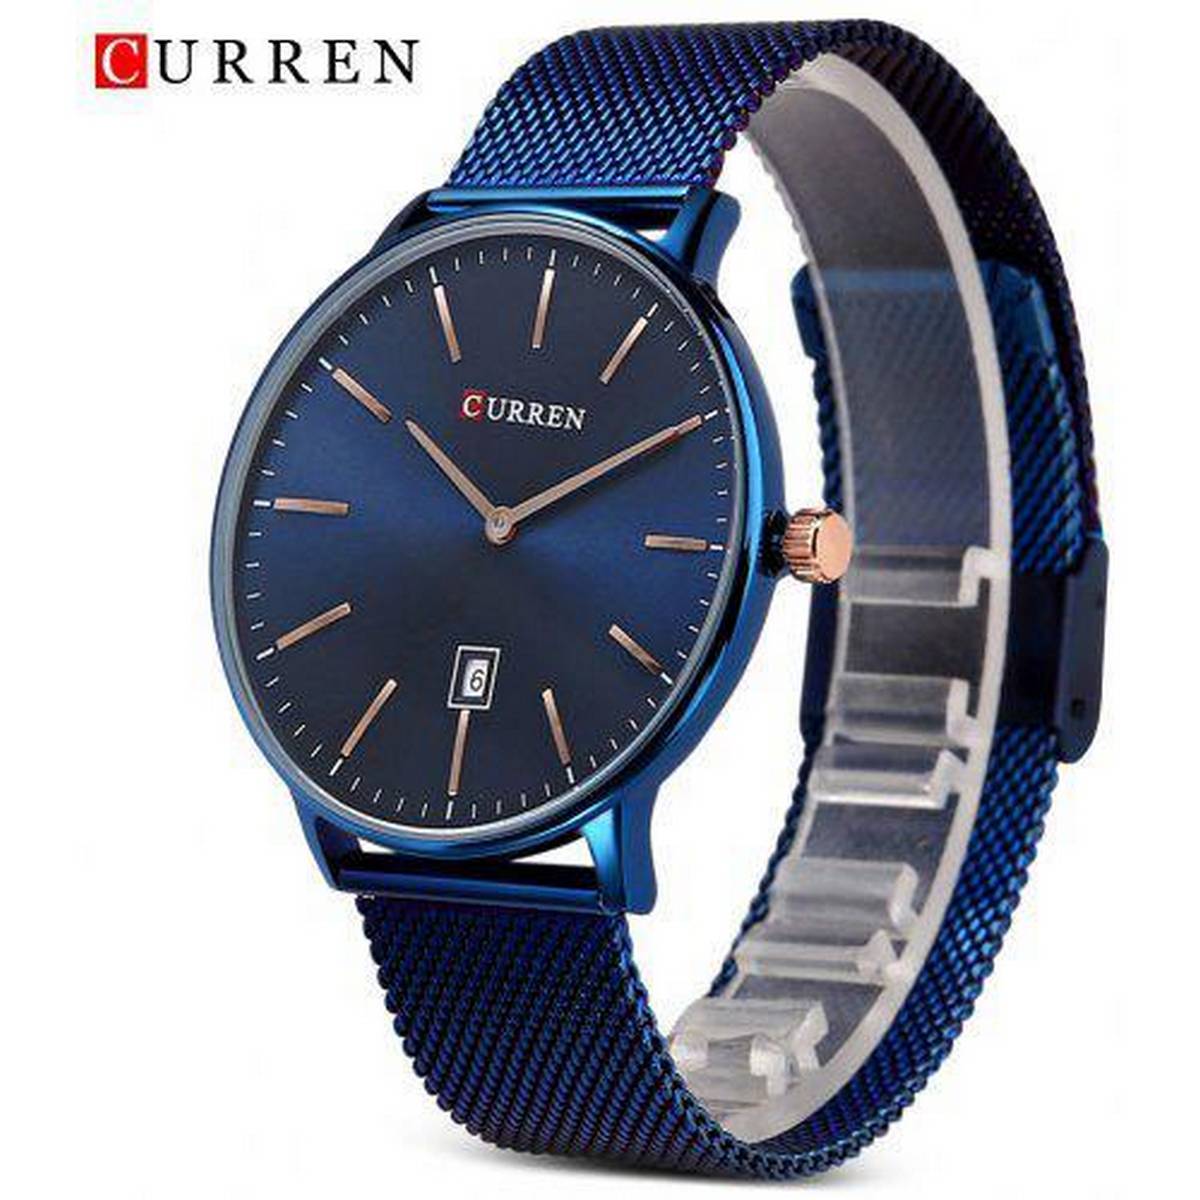 CURREN Original Brand Stainless Steel Band Wrist Watch For Men With Brand (Box & Bag)-8302